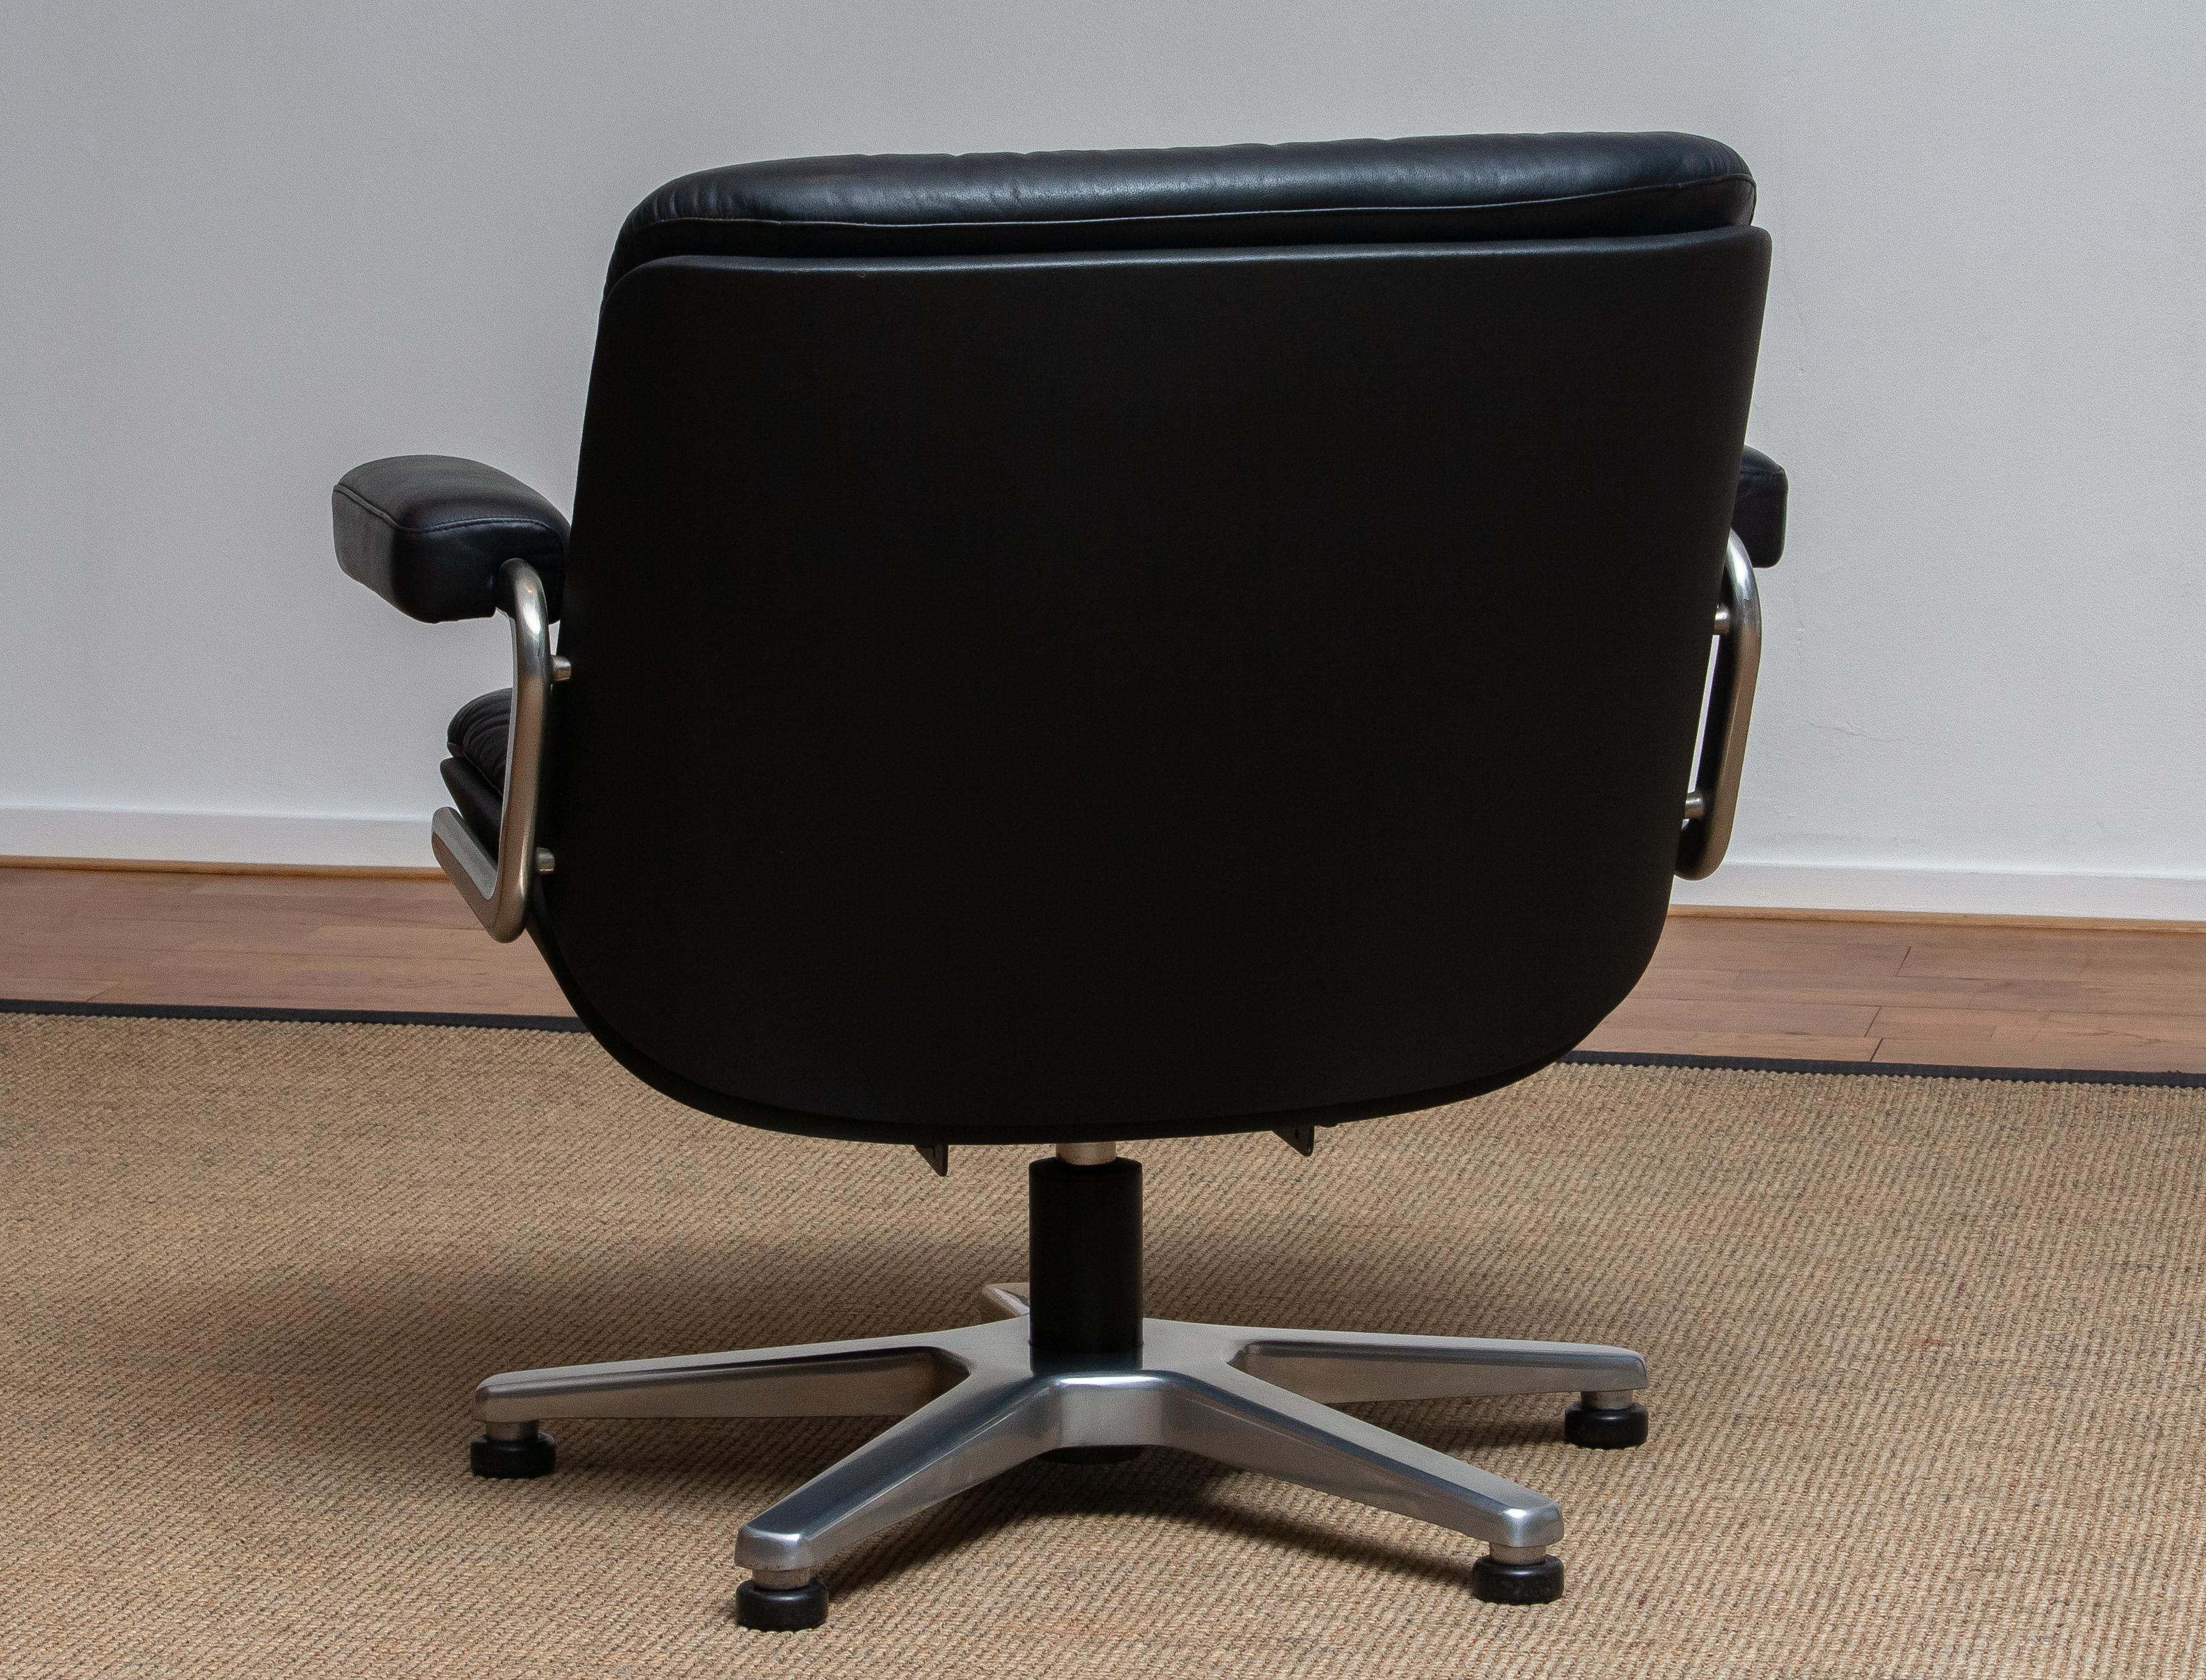 Swiss 1960s, Black Leather Swivel Chair by Martin Stoll for Giroflex Stoll Mdl, 7065